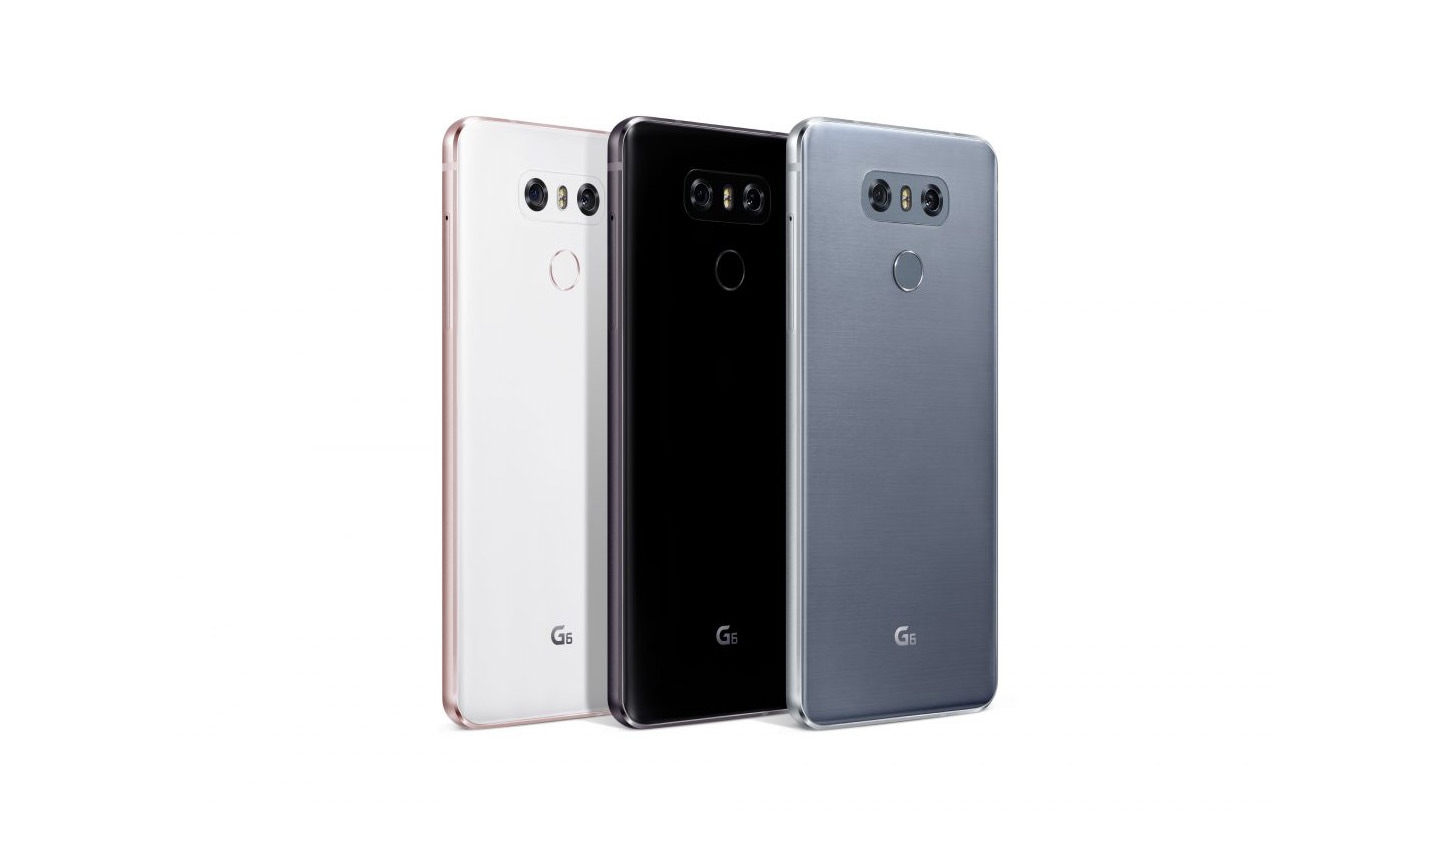 Rear view of three LG G6 phones showing three color options